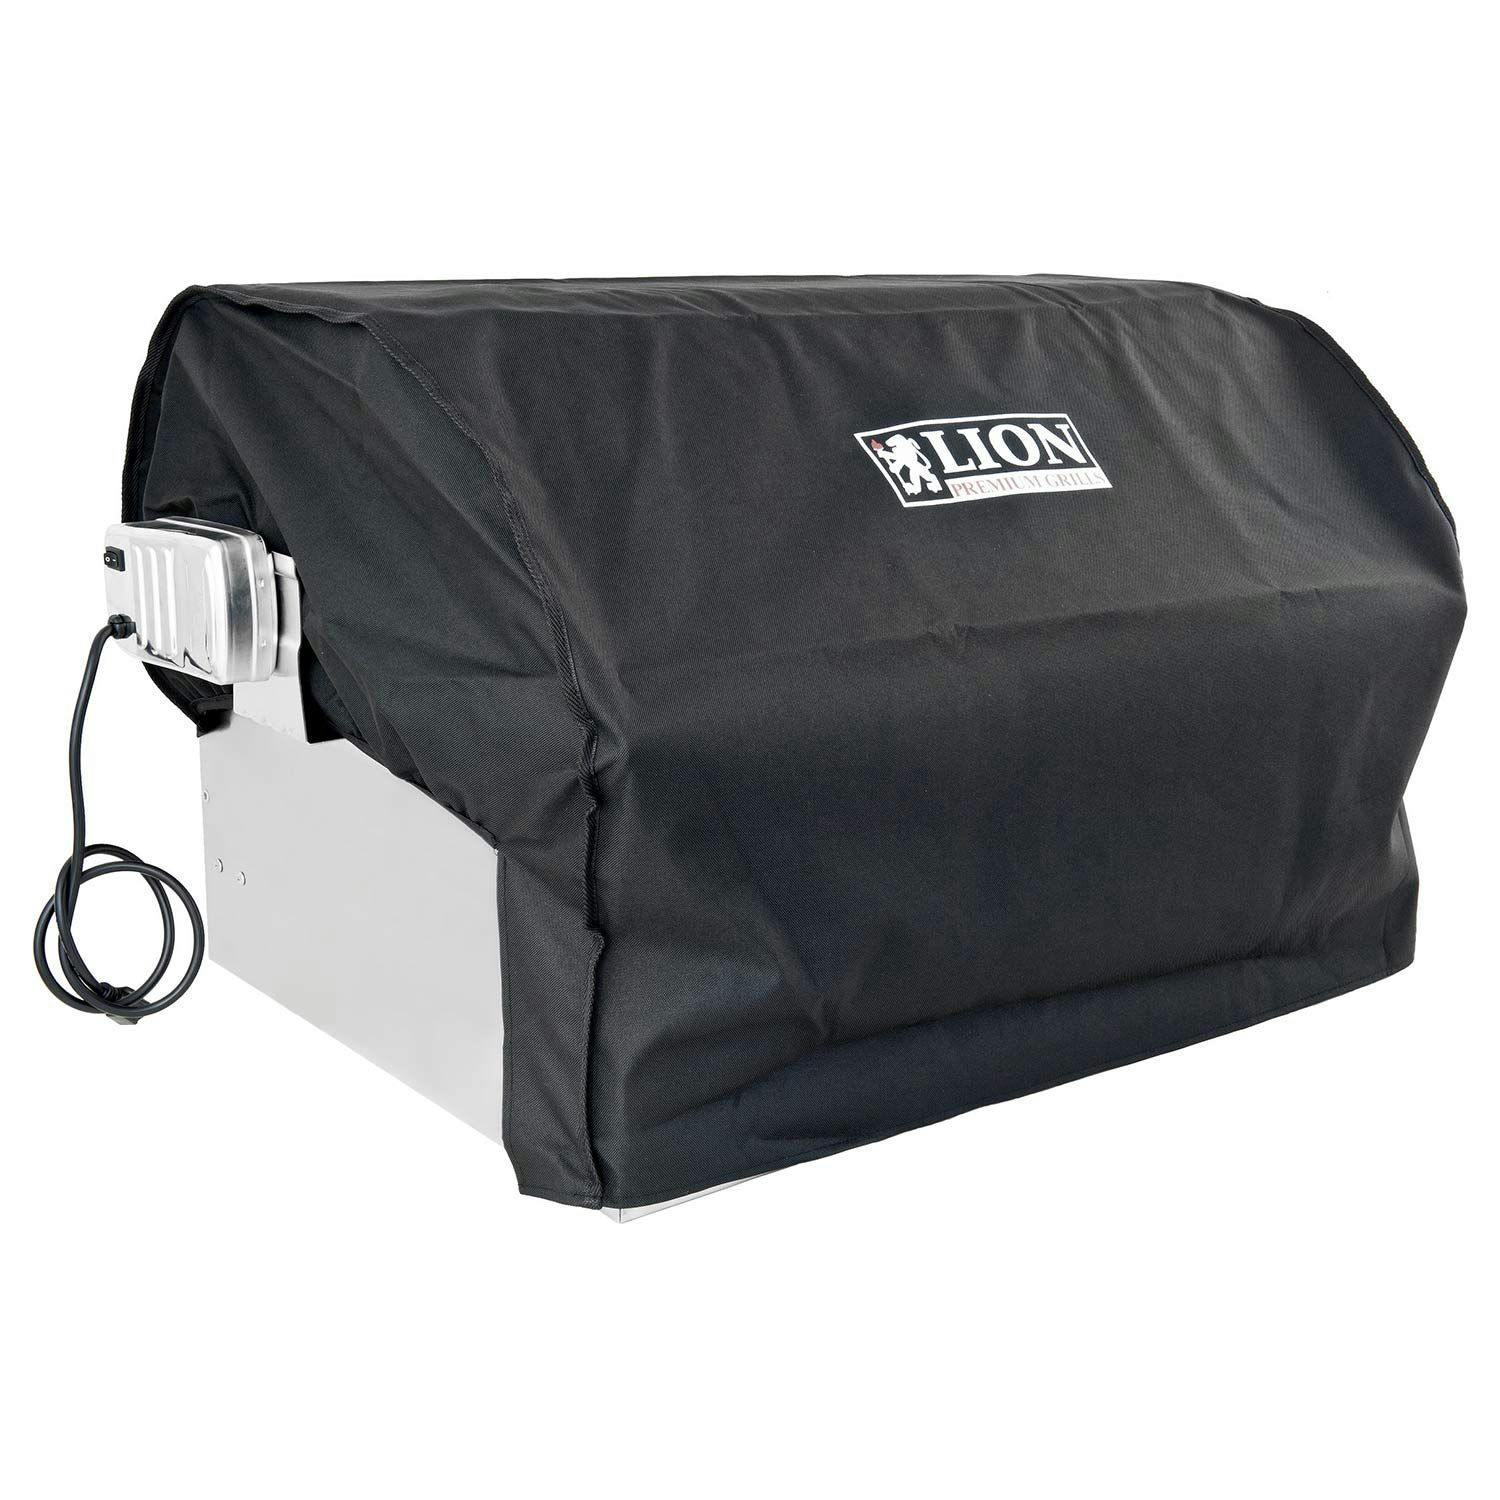 Lion Grill Cover For Gas Grill